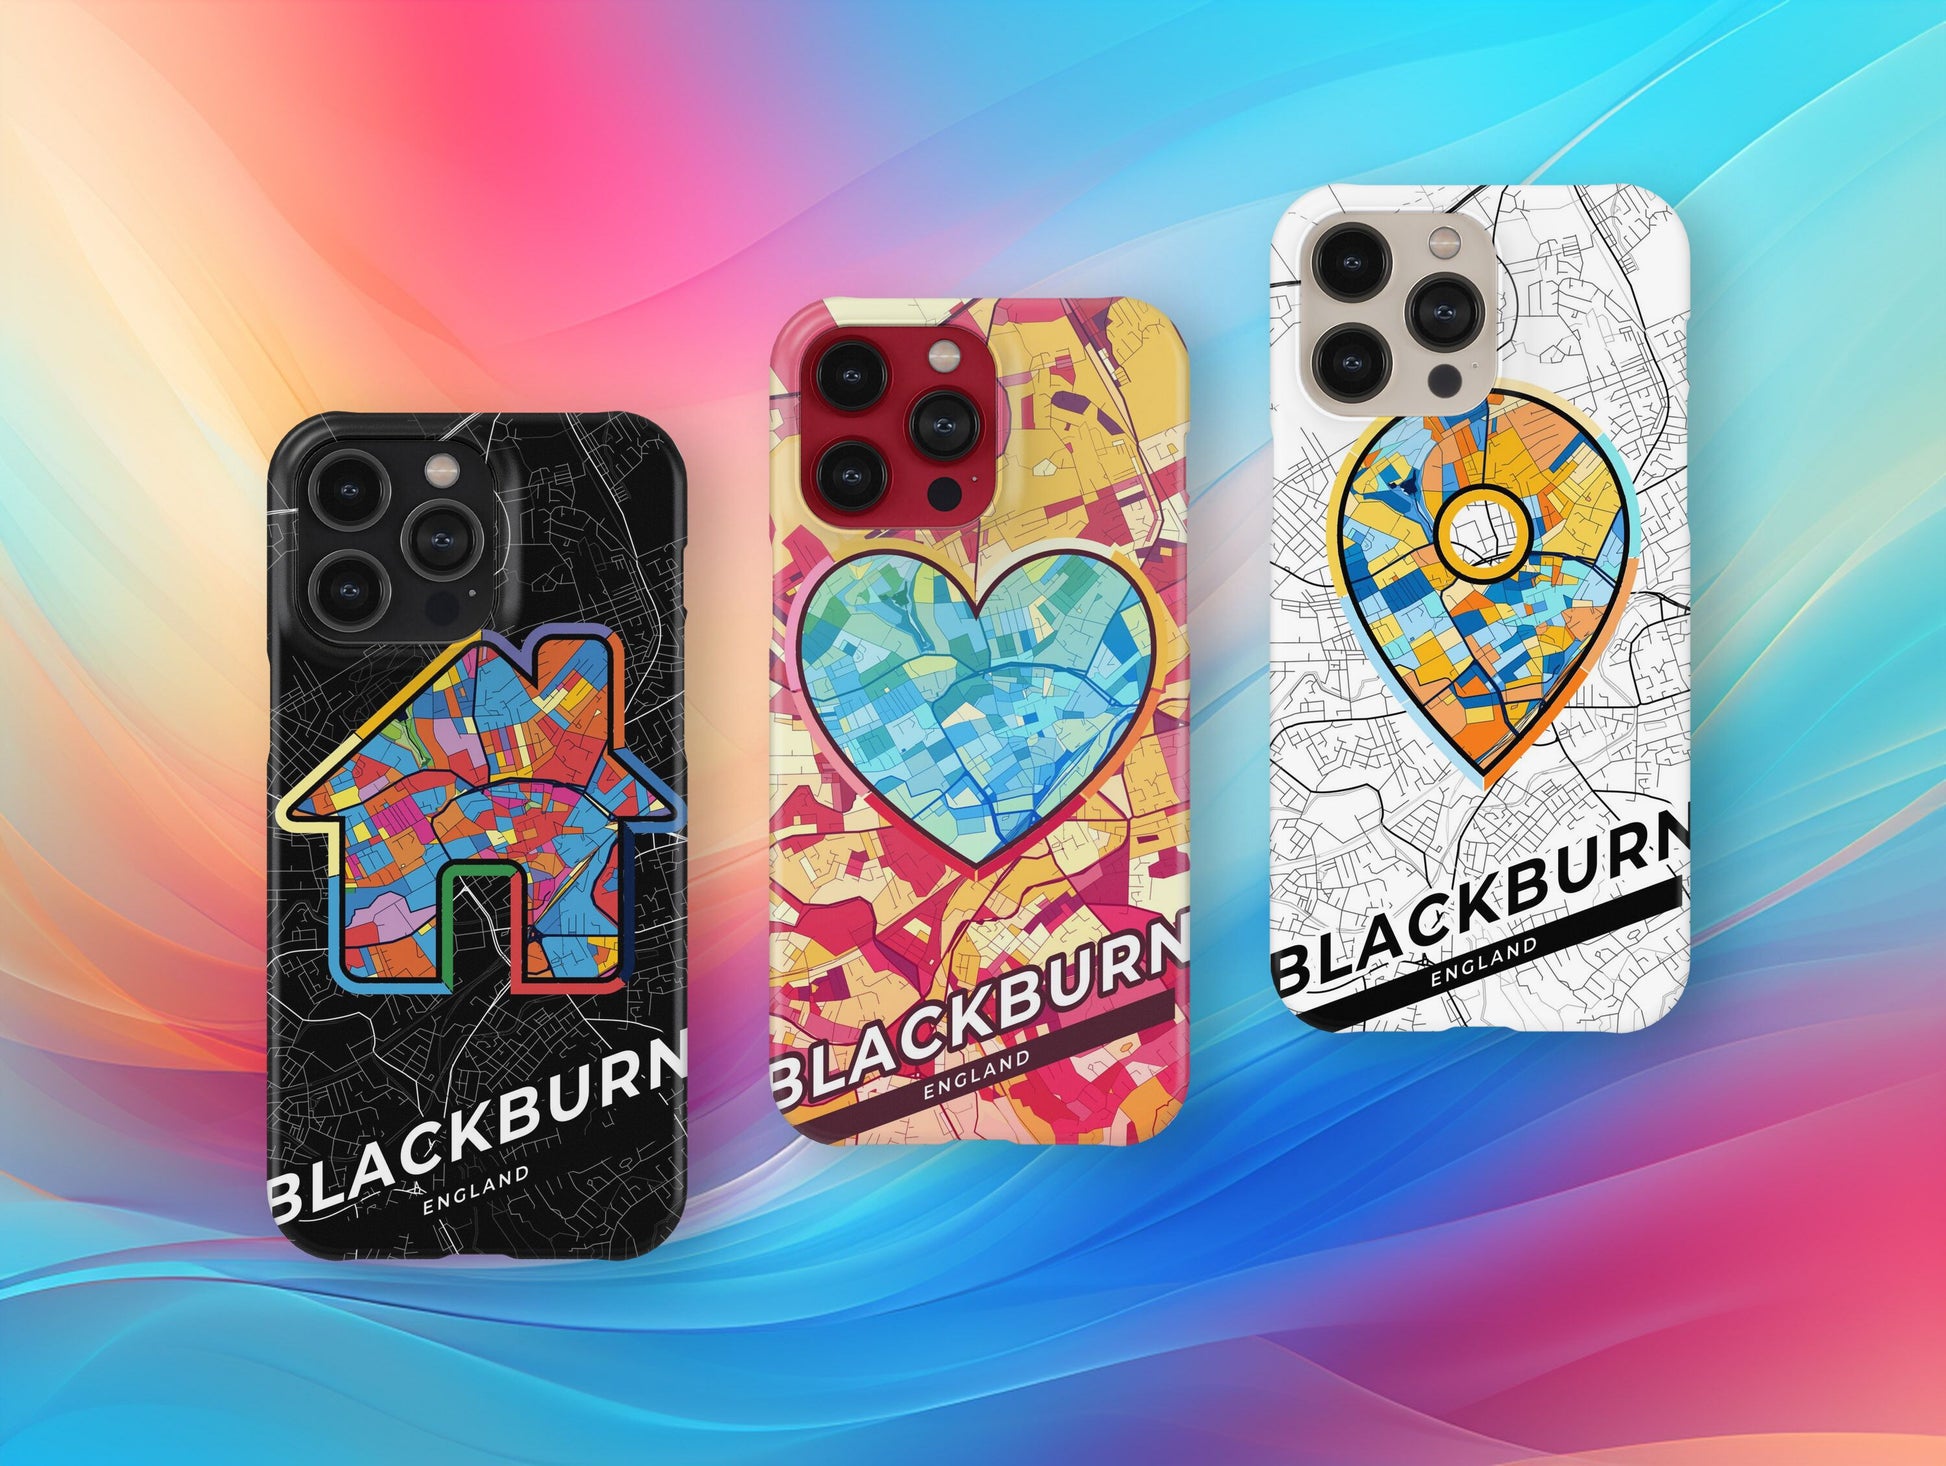 Blackburn England slim phone case with colorful icon. Birthday, wedding or housewarming gift. Couple match cases.